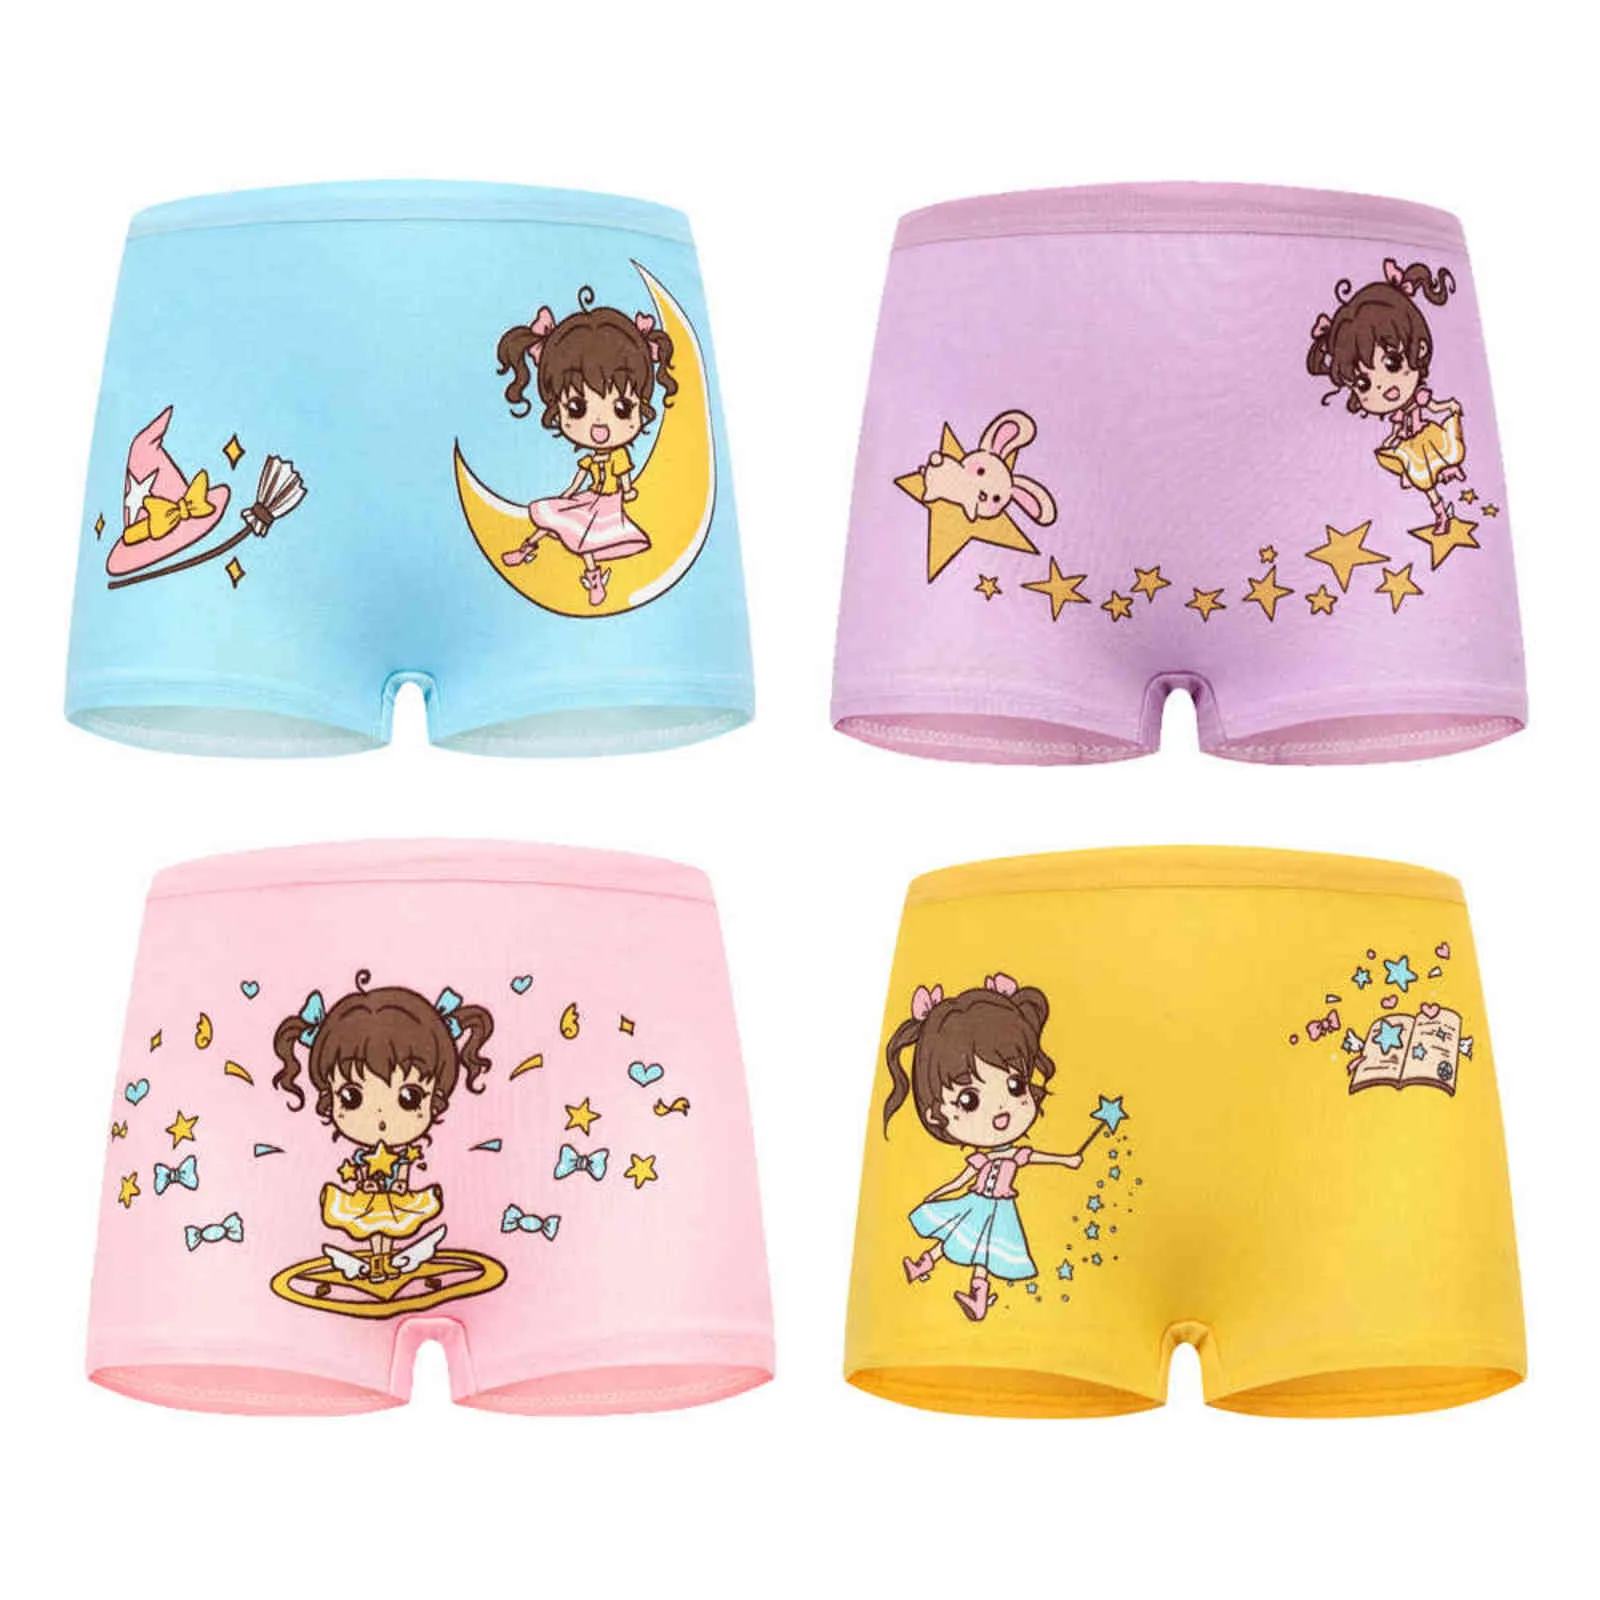 High Quality Cotton Girls Kidley Panties Set Of 4 With Cute Pattern Soft  Boxer Briefs For 2 12Y Children Childs Underwear 211122 From Kong06, $9.28